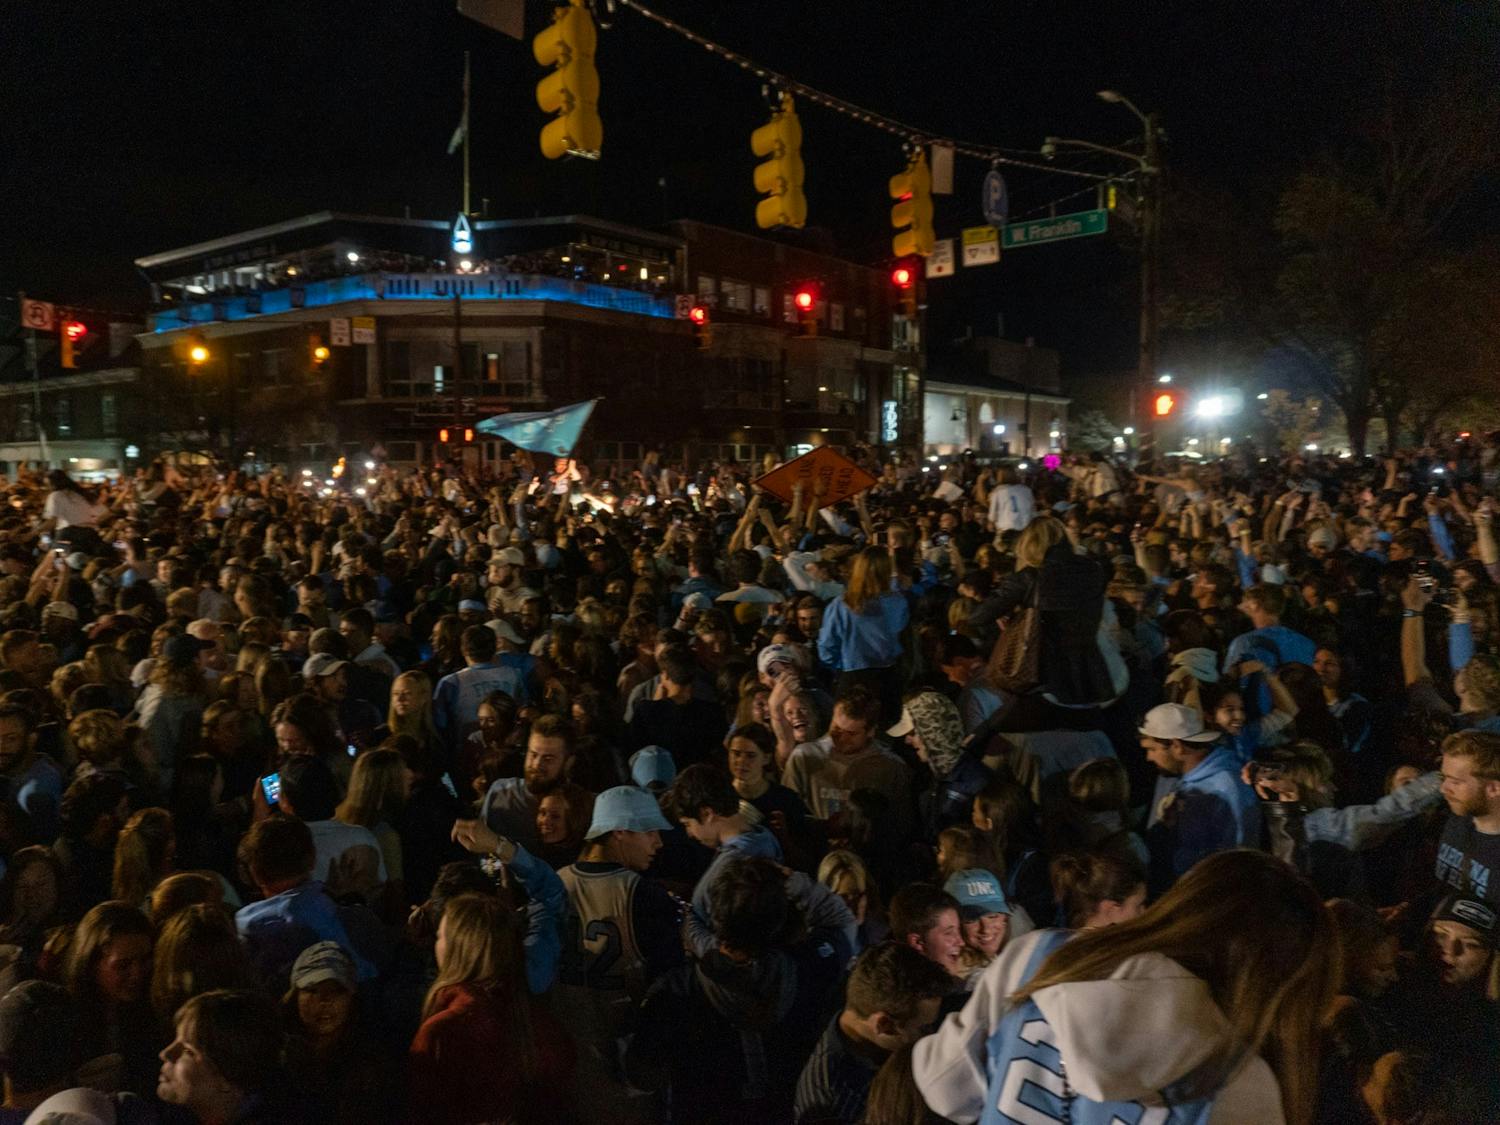 North Carolina men's basketball fans rush Franklin St. after a historic win over Duke in the Final Four game on Saturday, Apr. 2, 2022. UNC won 81-77.